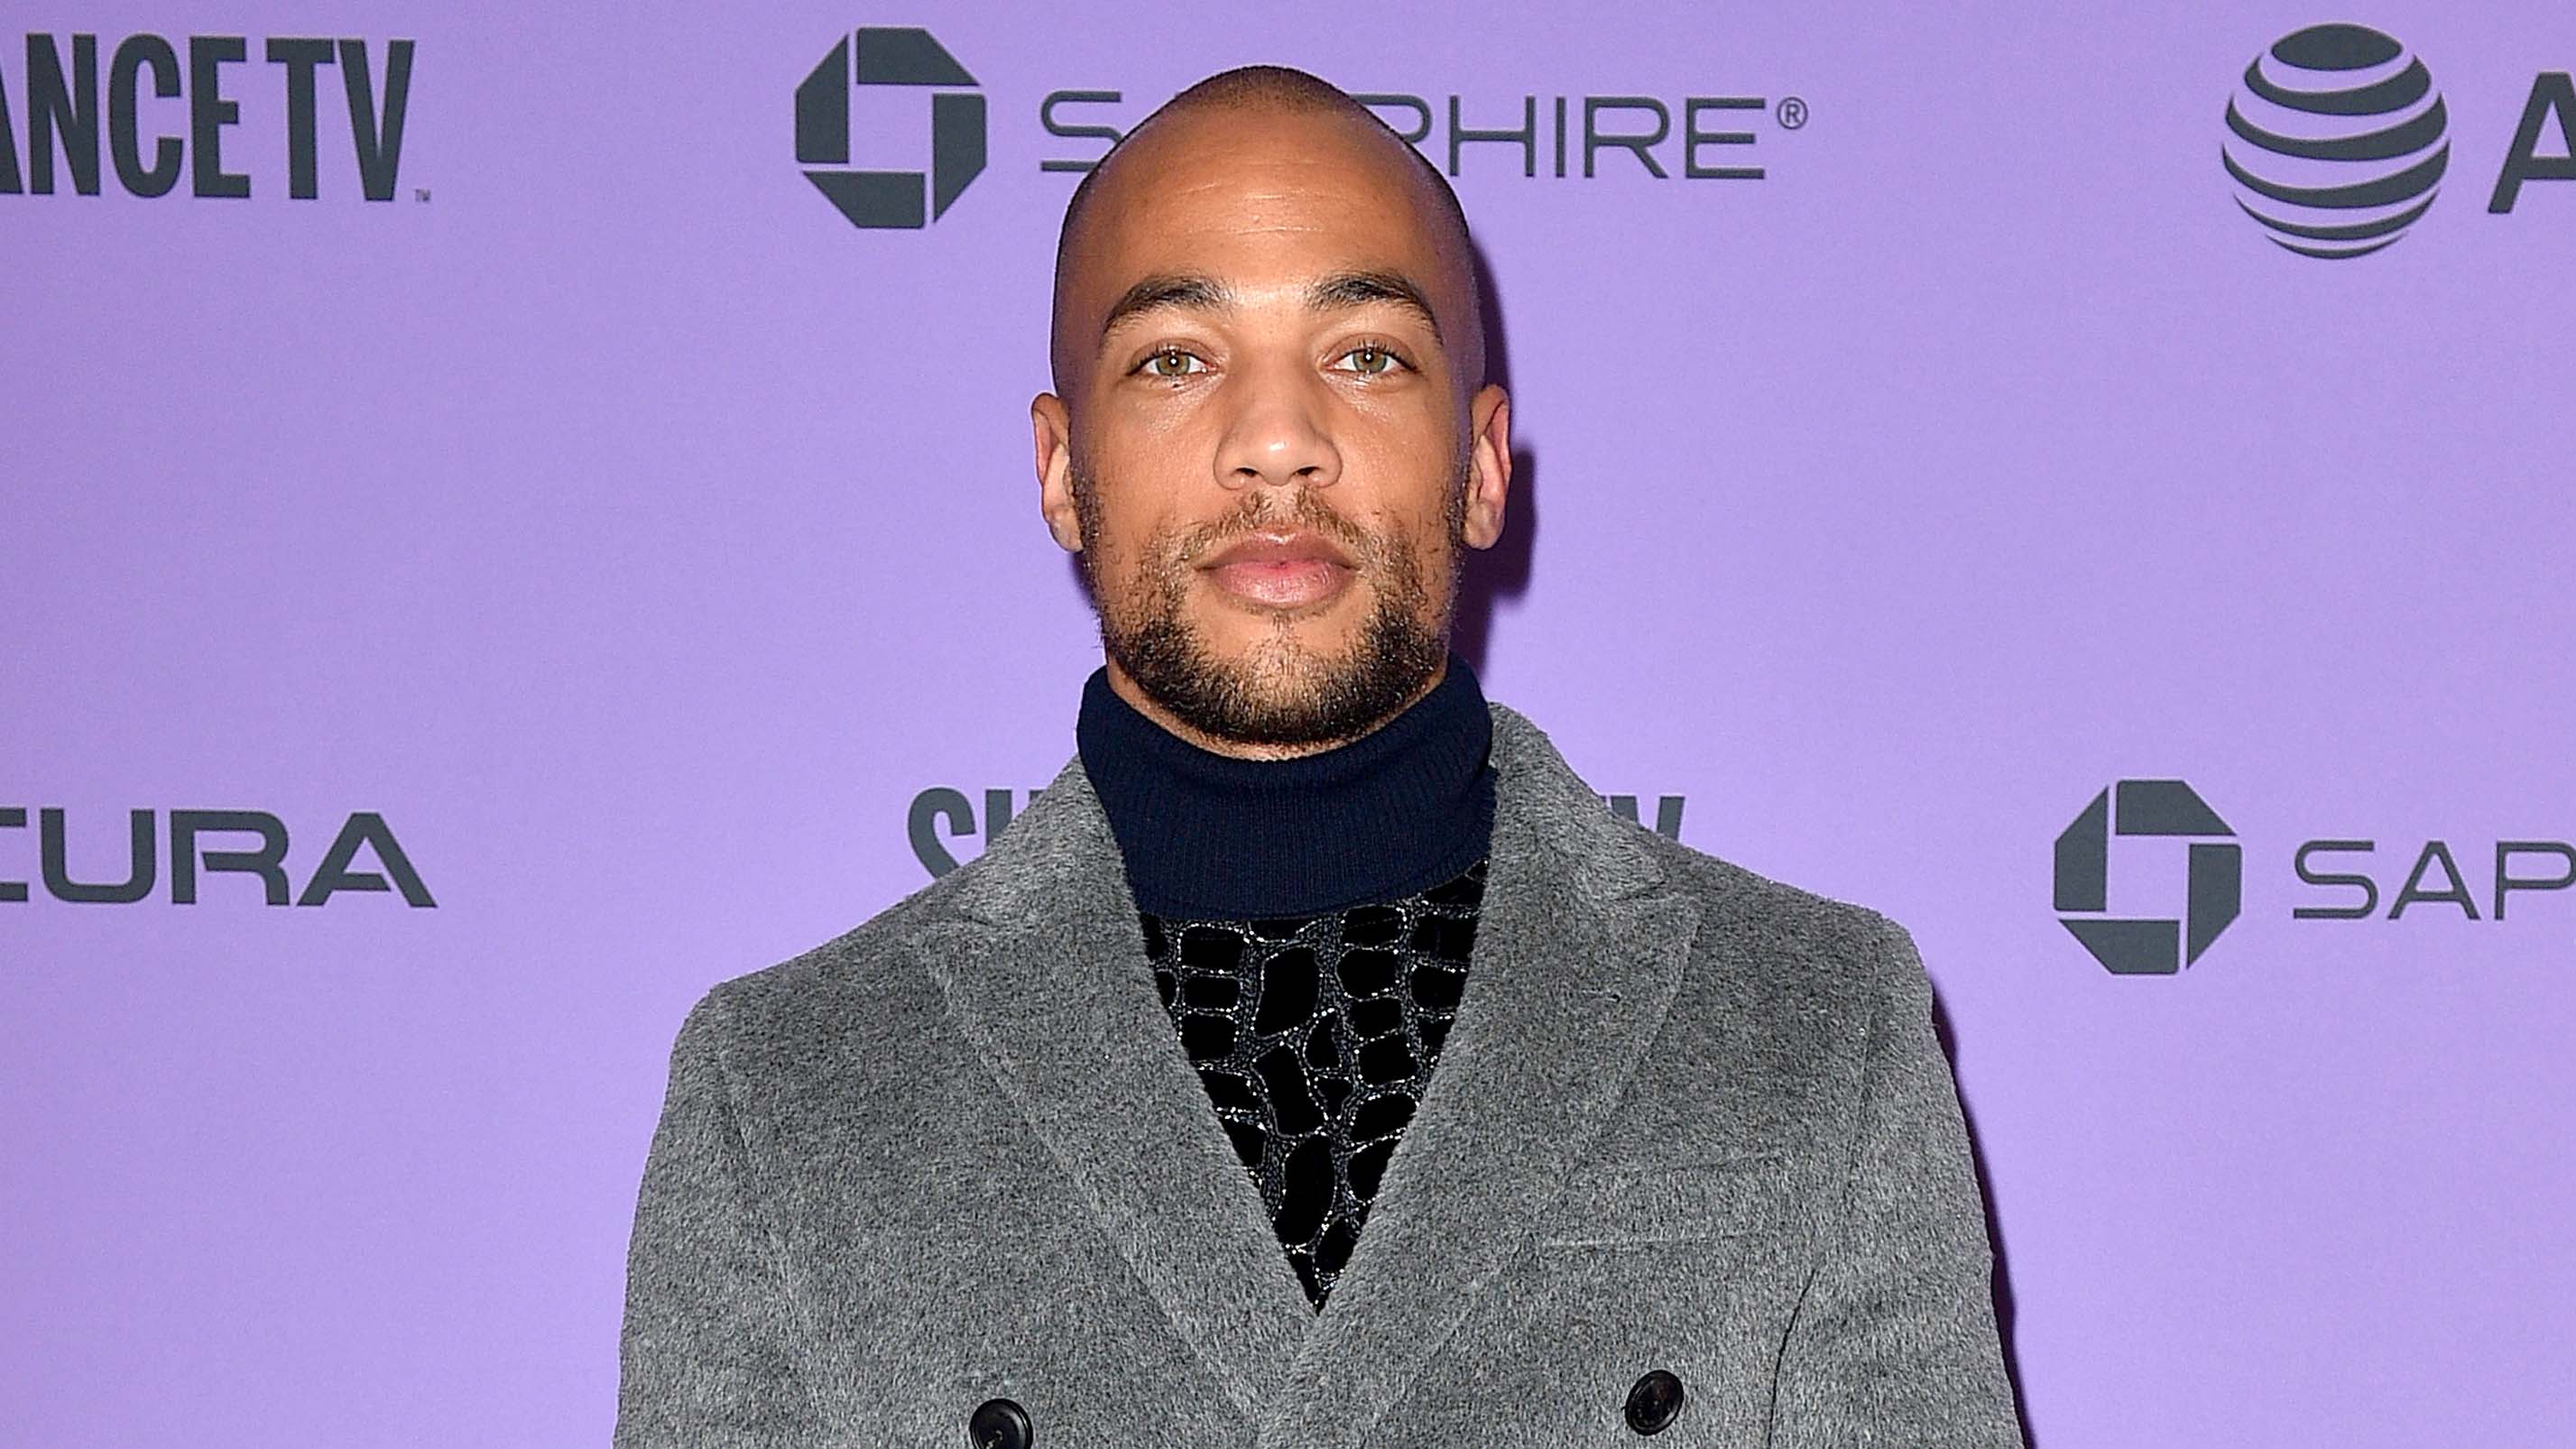 'Insecure' actor Kendrick Sampson says he was shot 7 times with rubber bullets by police while protesting - Fox News